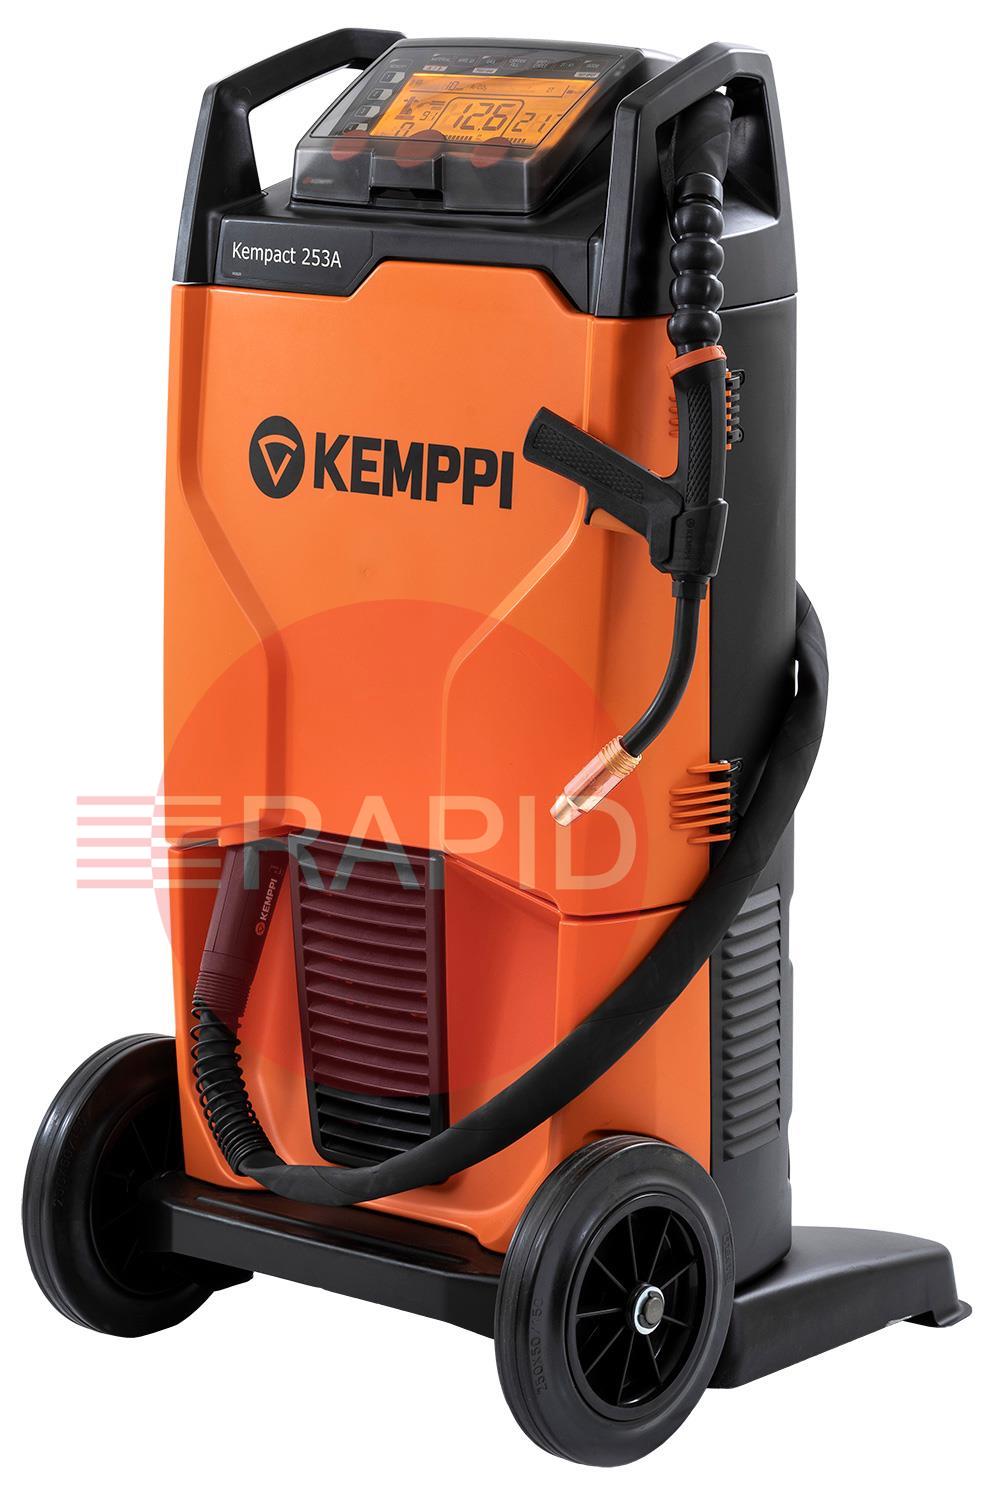 P2272GXE  Kemppi Kempact RA 253A, 250A 3 Phase 400v Mig Welder, with Flexlite GXe 205G 5.0m Torch